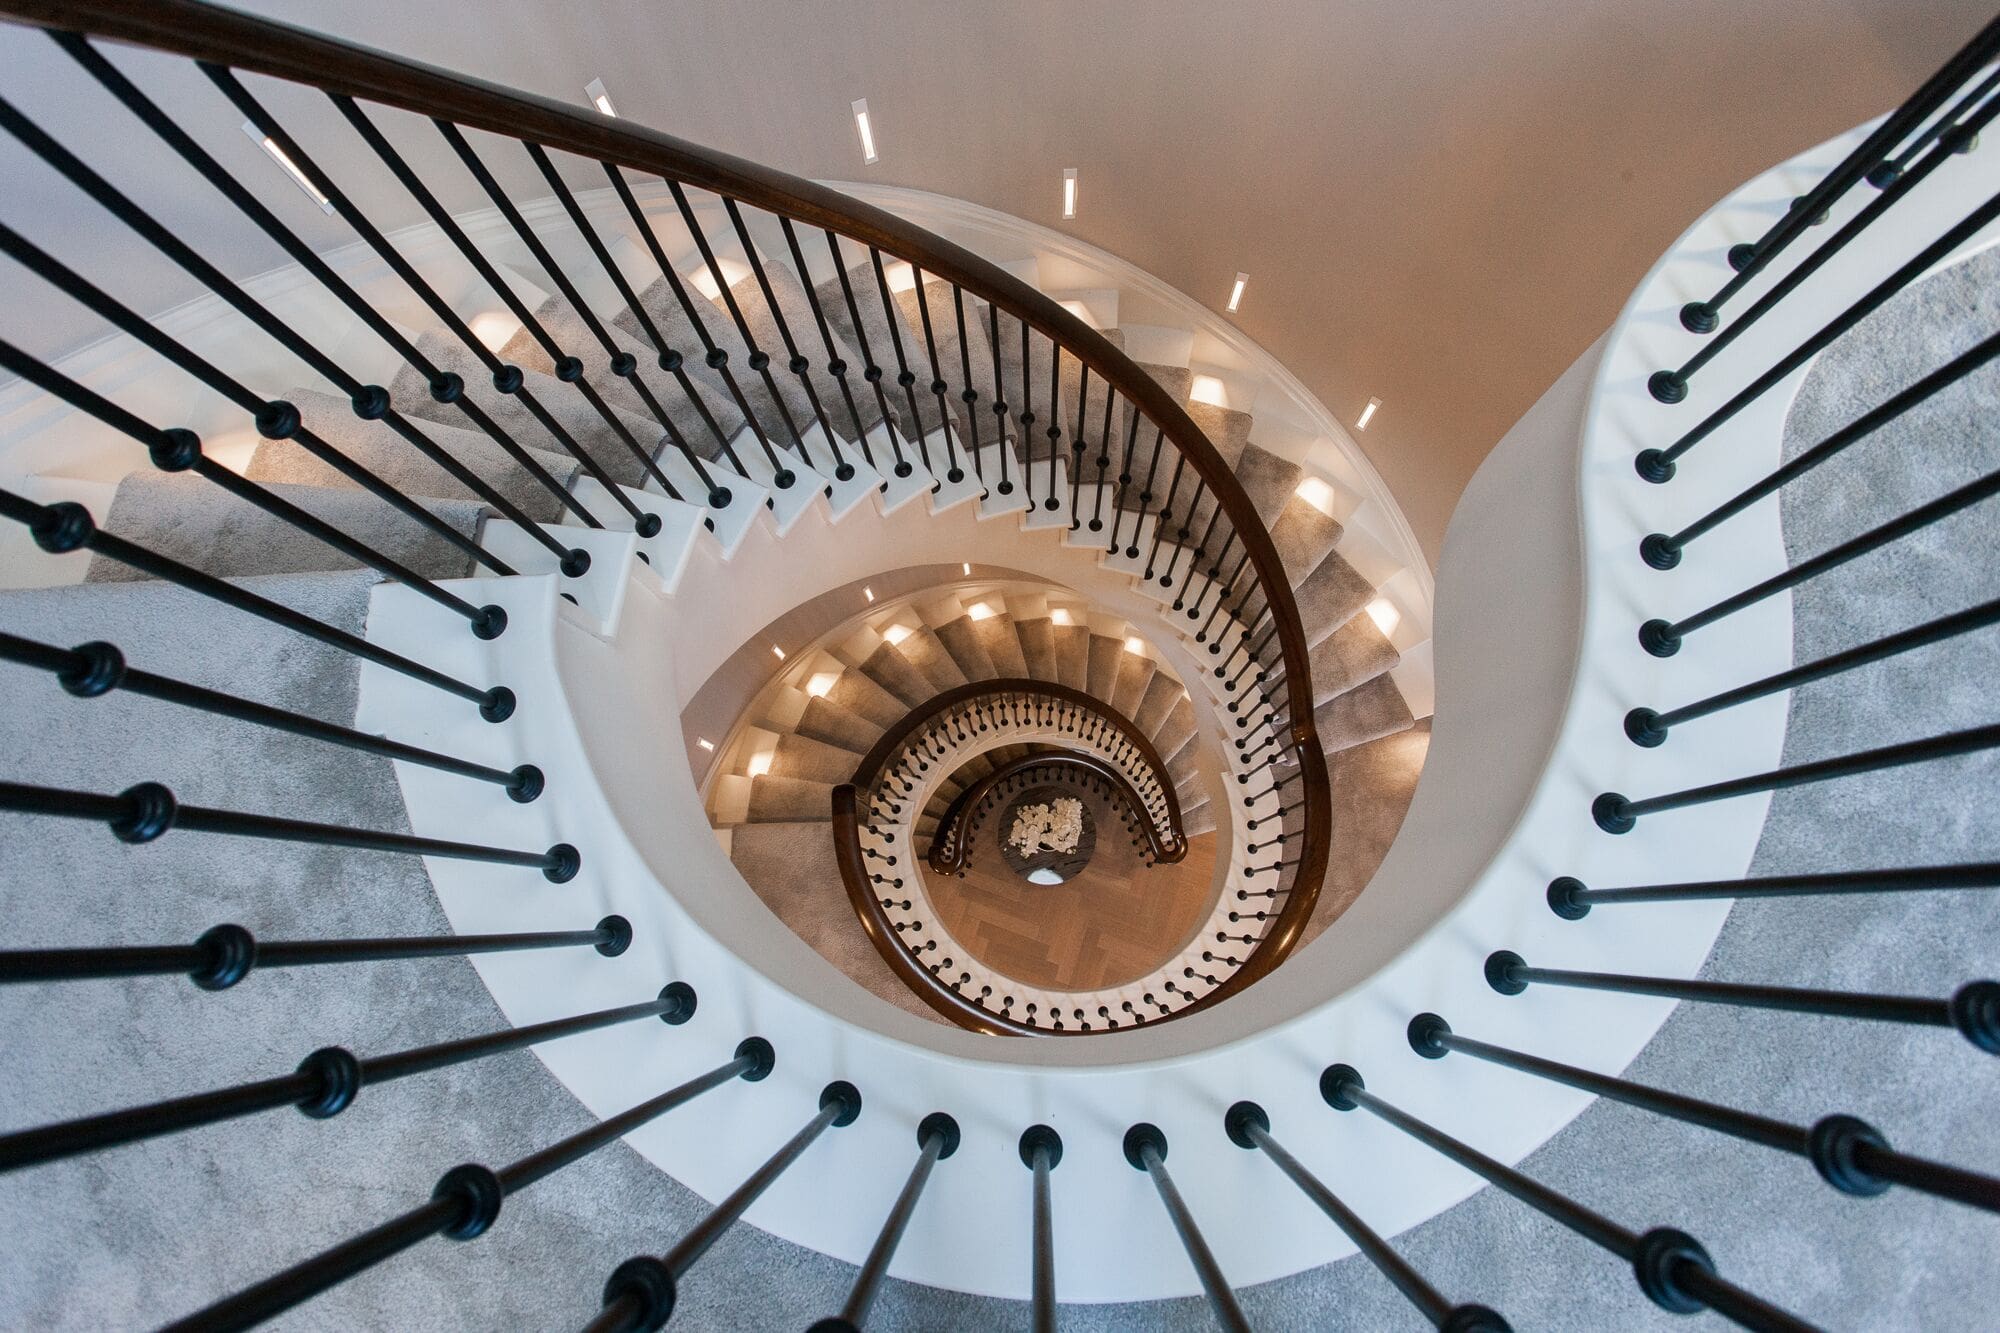 a view of a spiral staircase from the top.